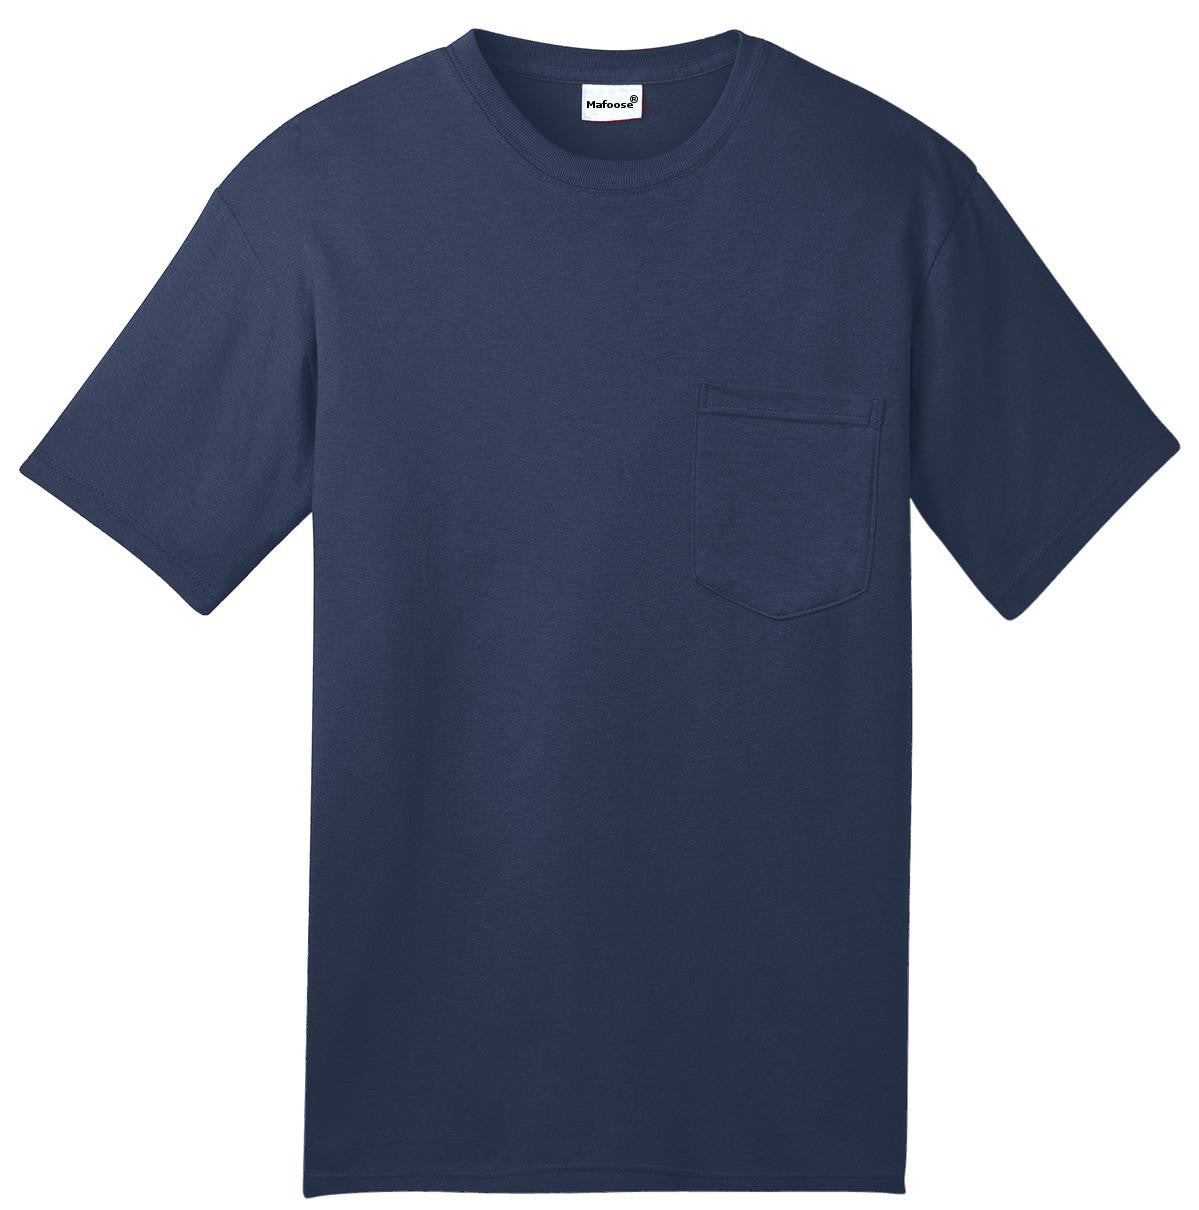 Mafoose Men's All American Tee Shirt with Pocket Navy-Front